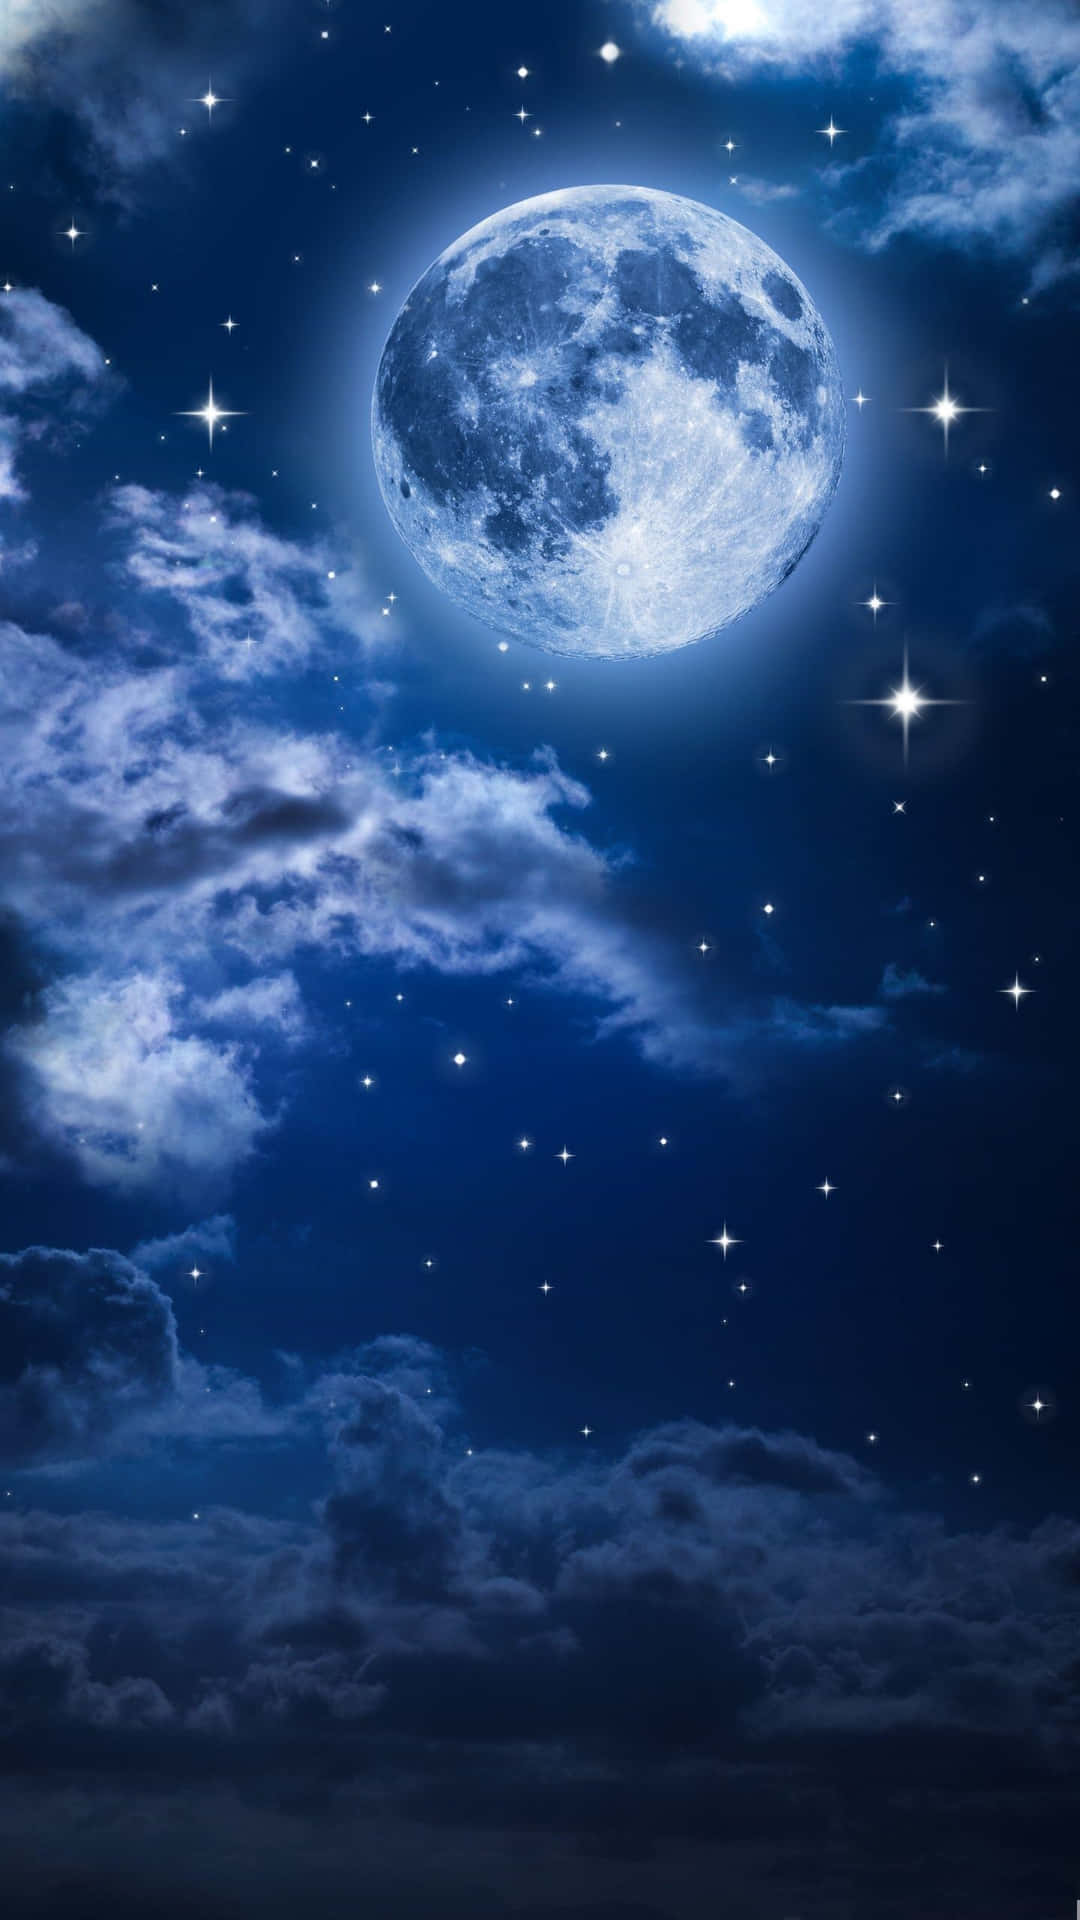 The Moon Is In The Sky With Stars And Clouds Wallpaper